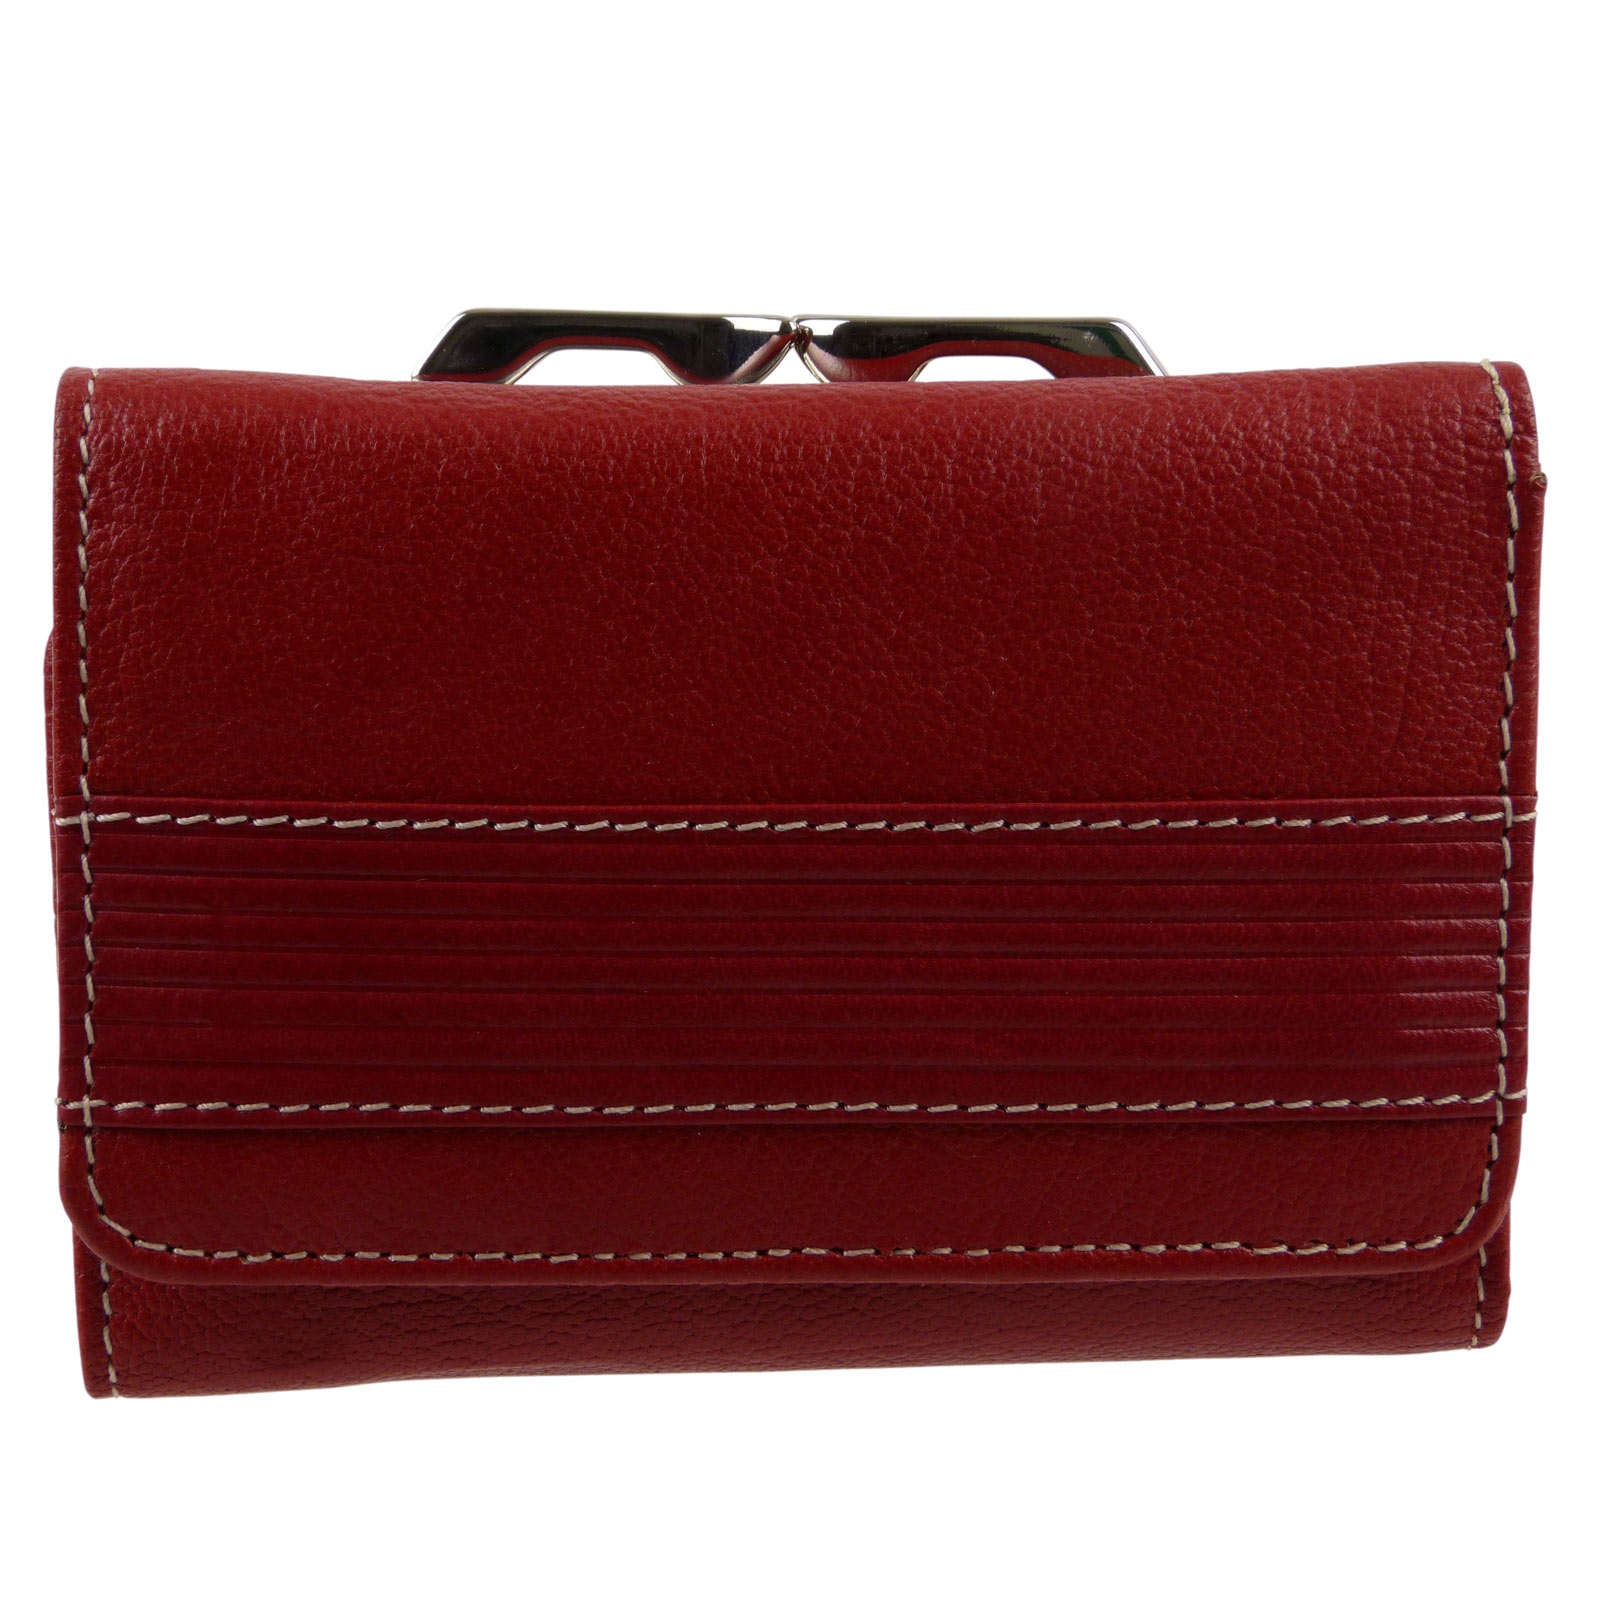 Ladies Tabbed Compact Leather Purse Classic Hansson NEVADA Collection ...